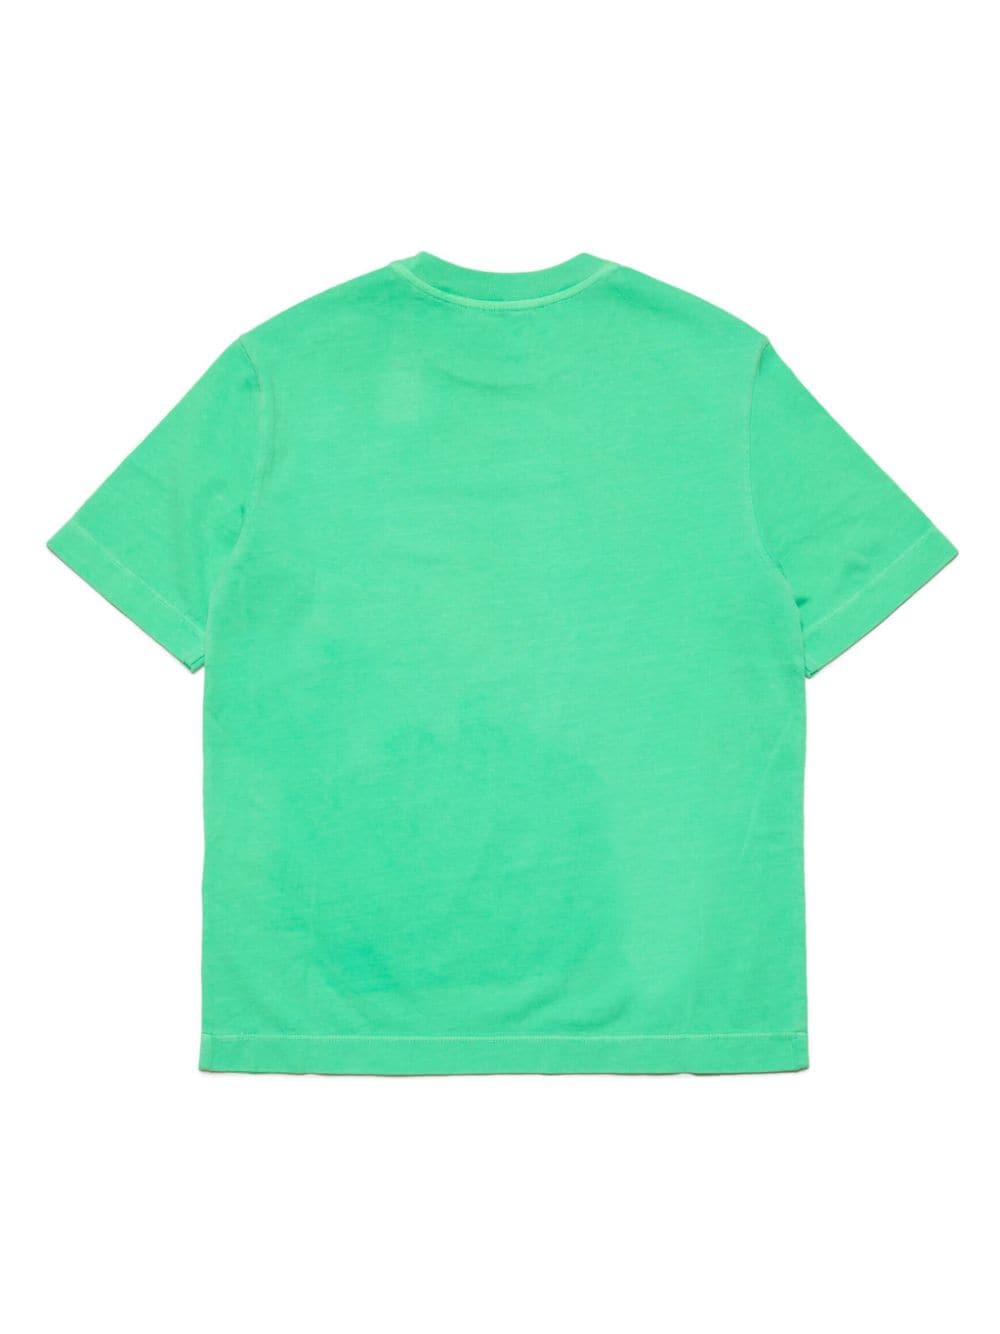 Green t-shirt for boys with logo